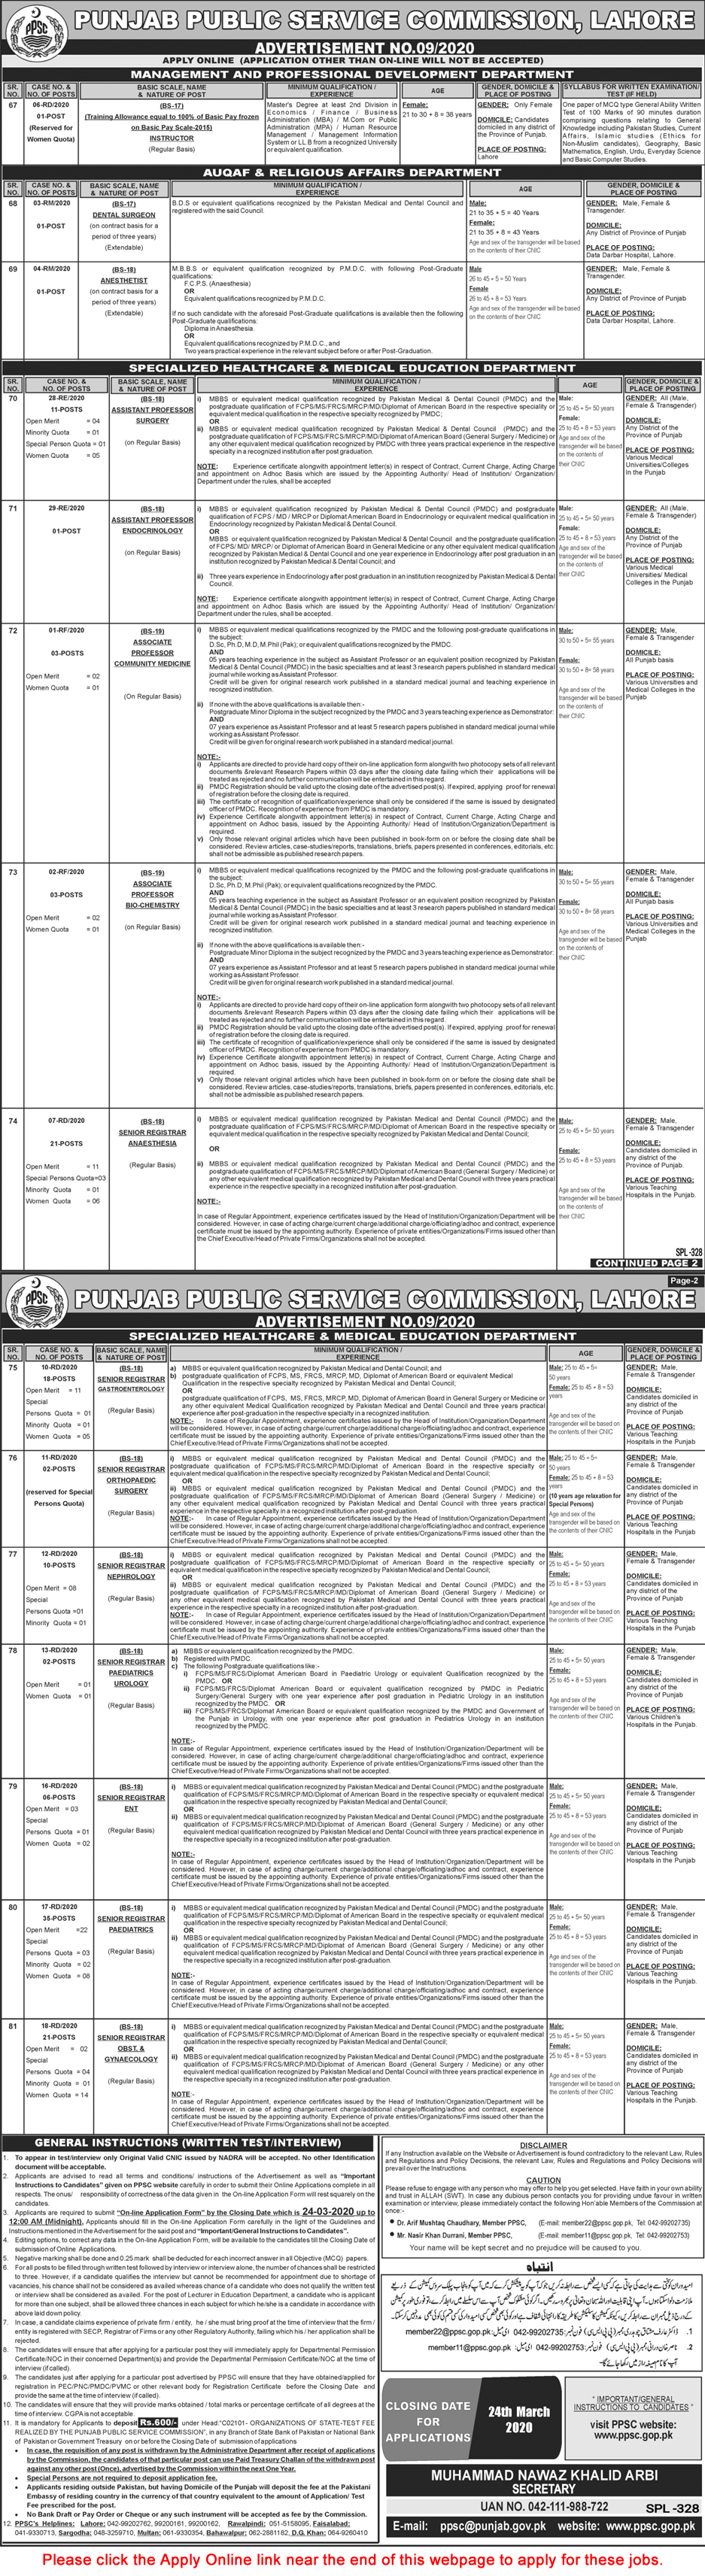 PPSC Jobs March 2020 Apply Online Consolidated Advertisement No 09/2020 9/2020 Latest